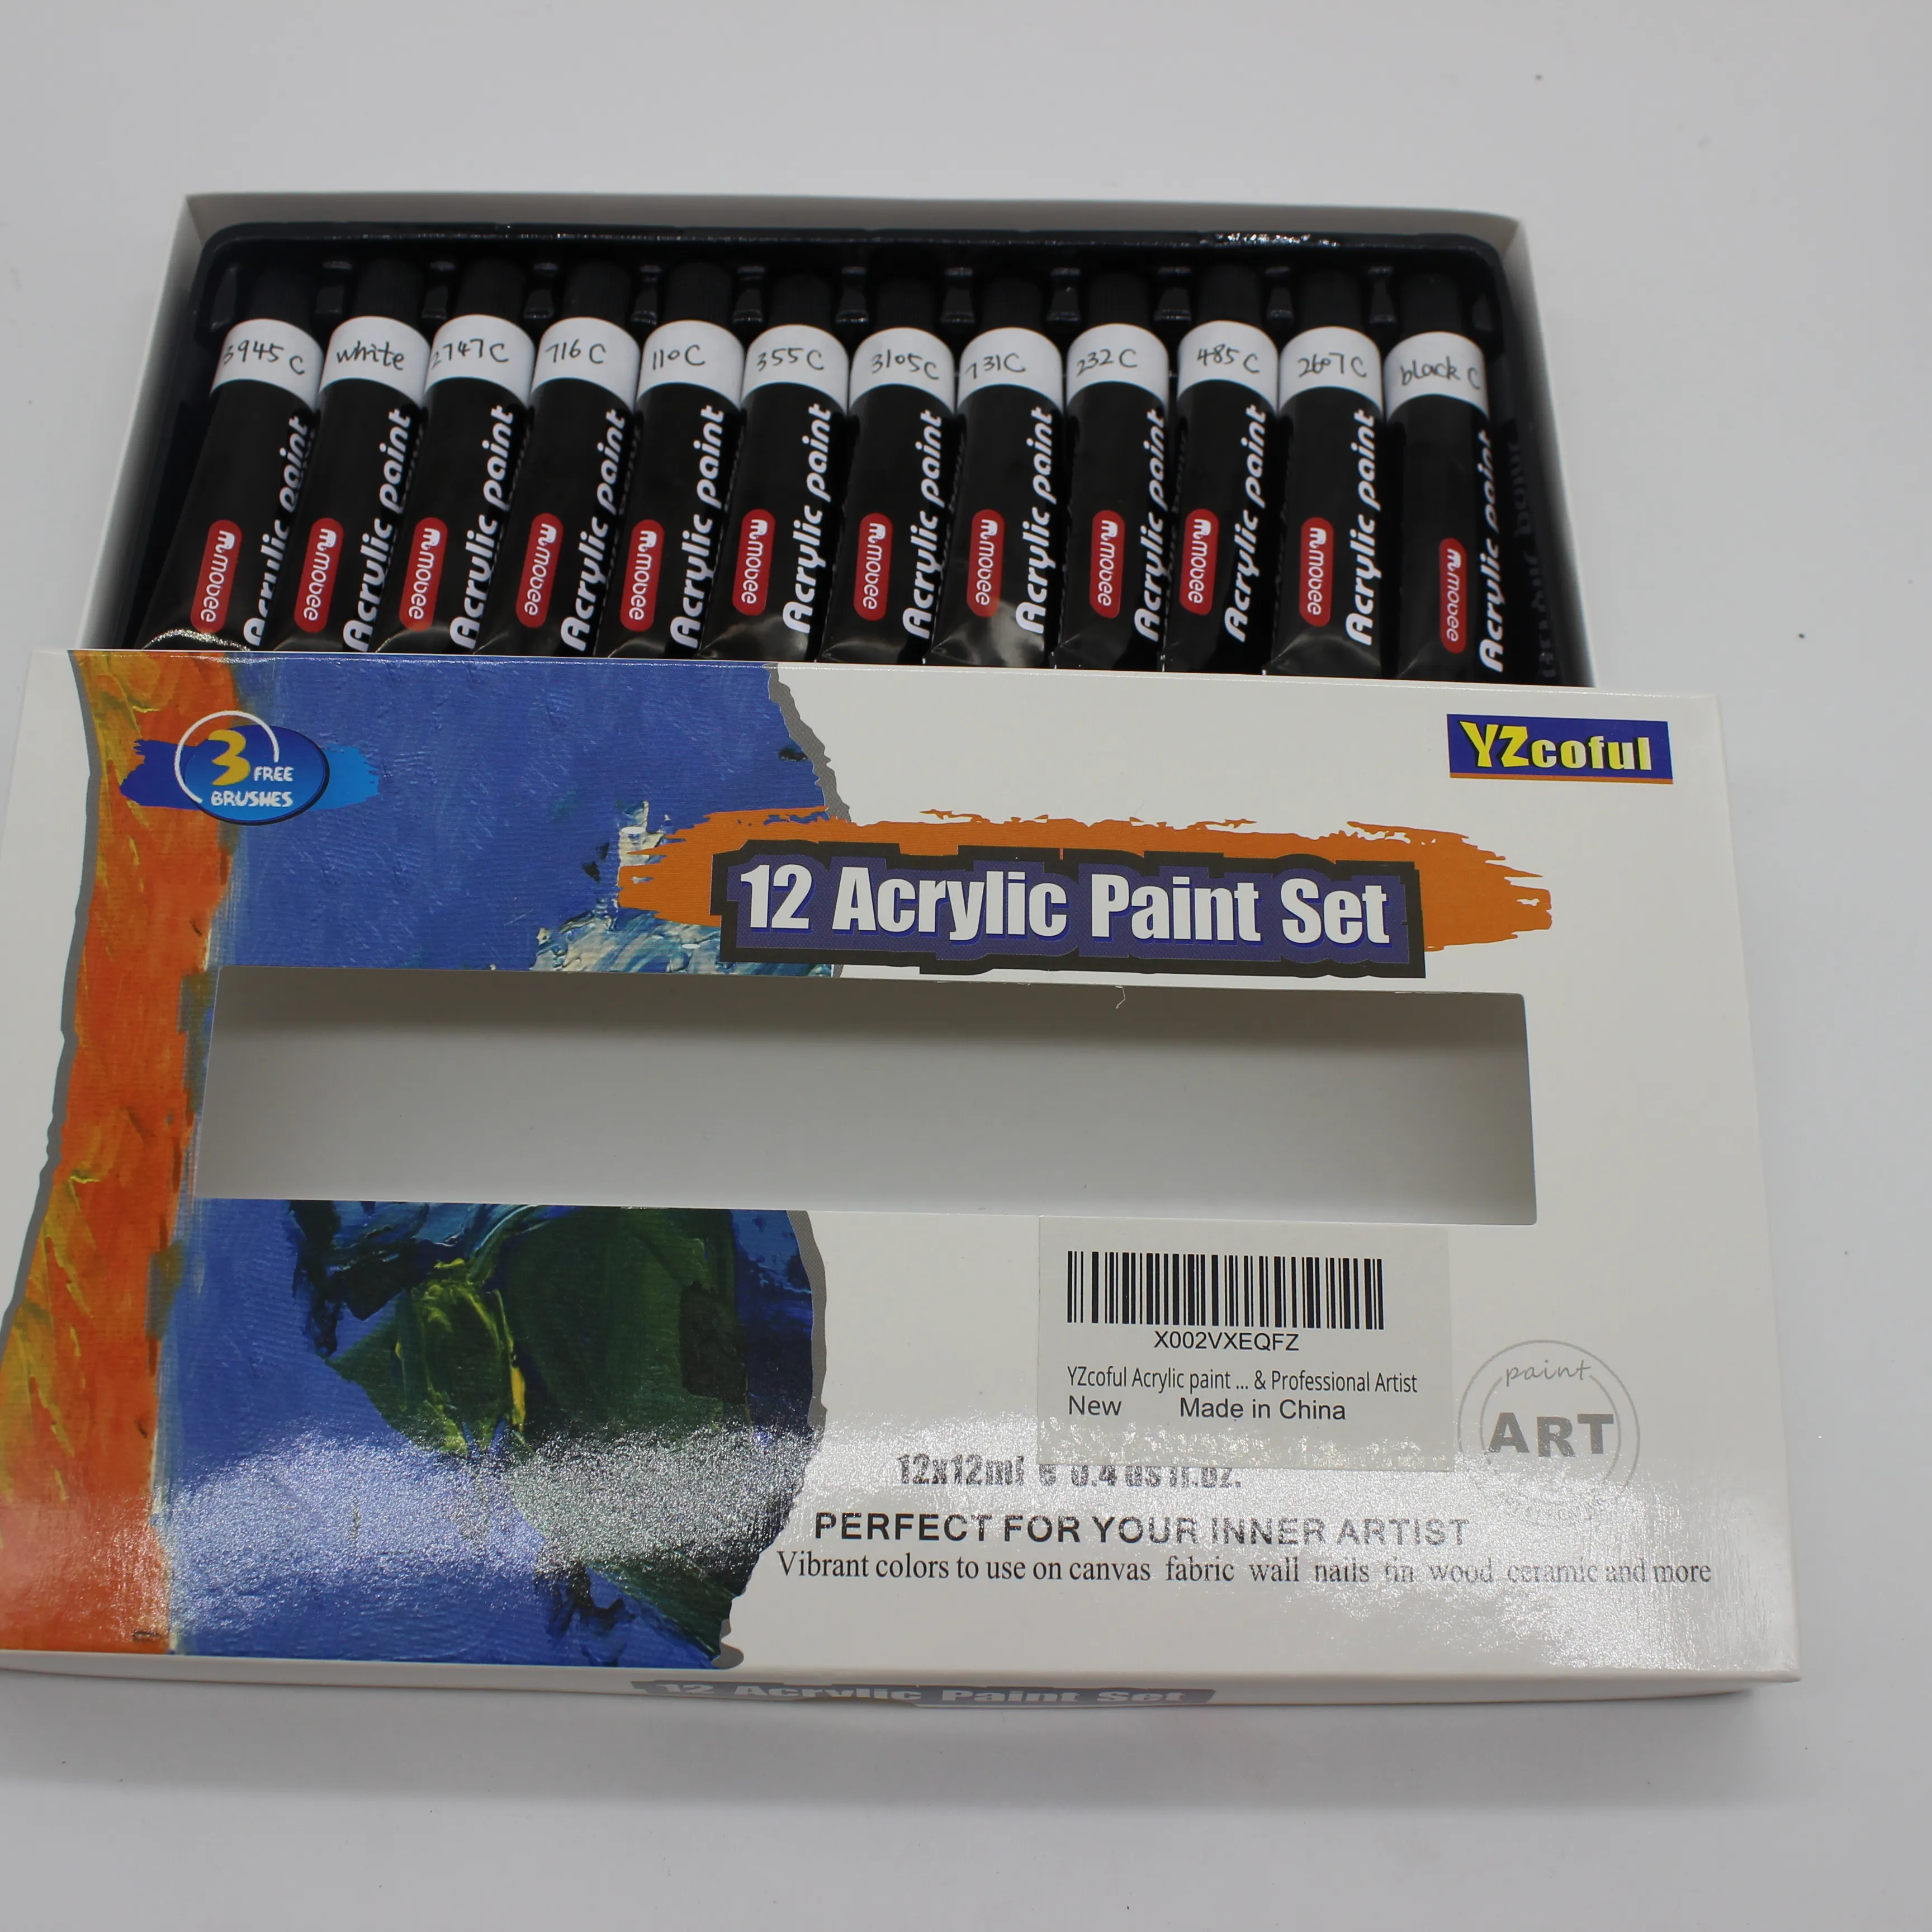 12 colors Acrylic Paint Set Acrylic Paints for Painting Canvas Painting set with Brush